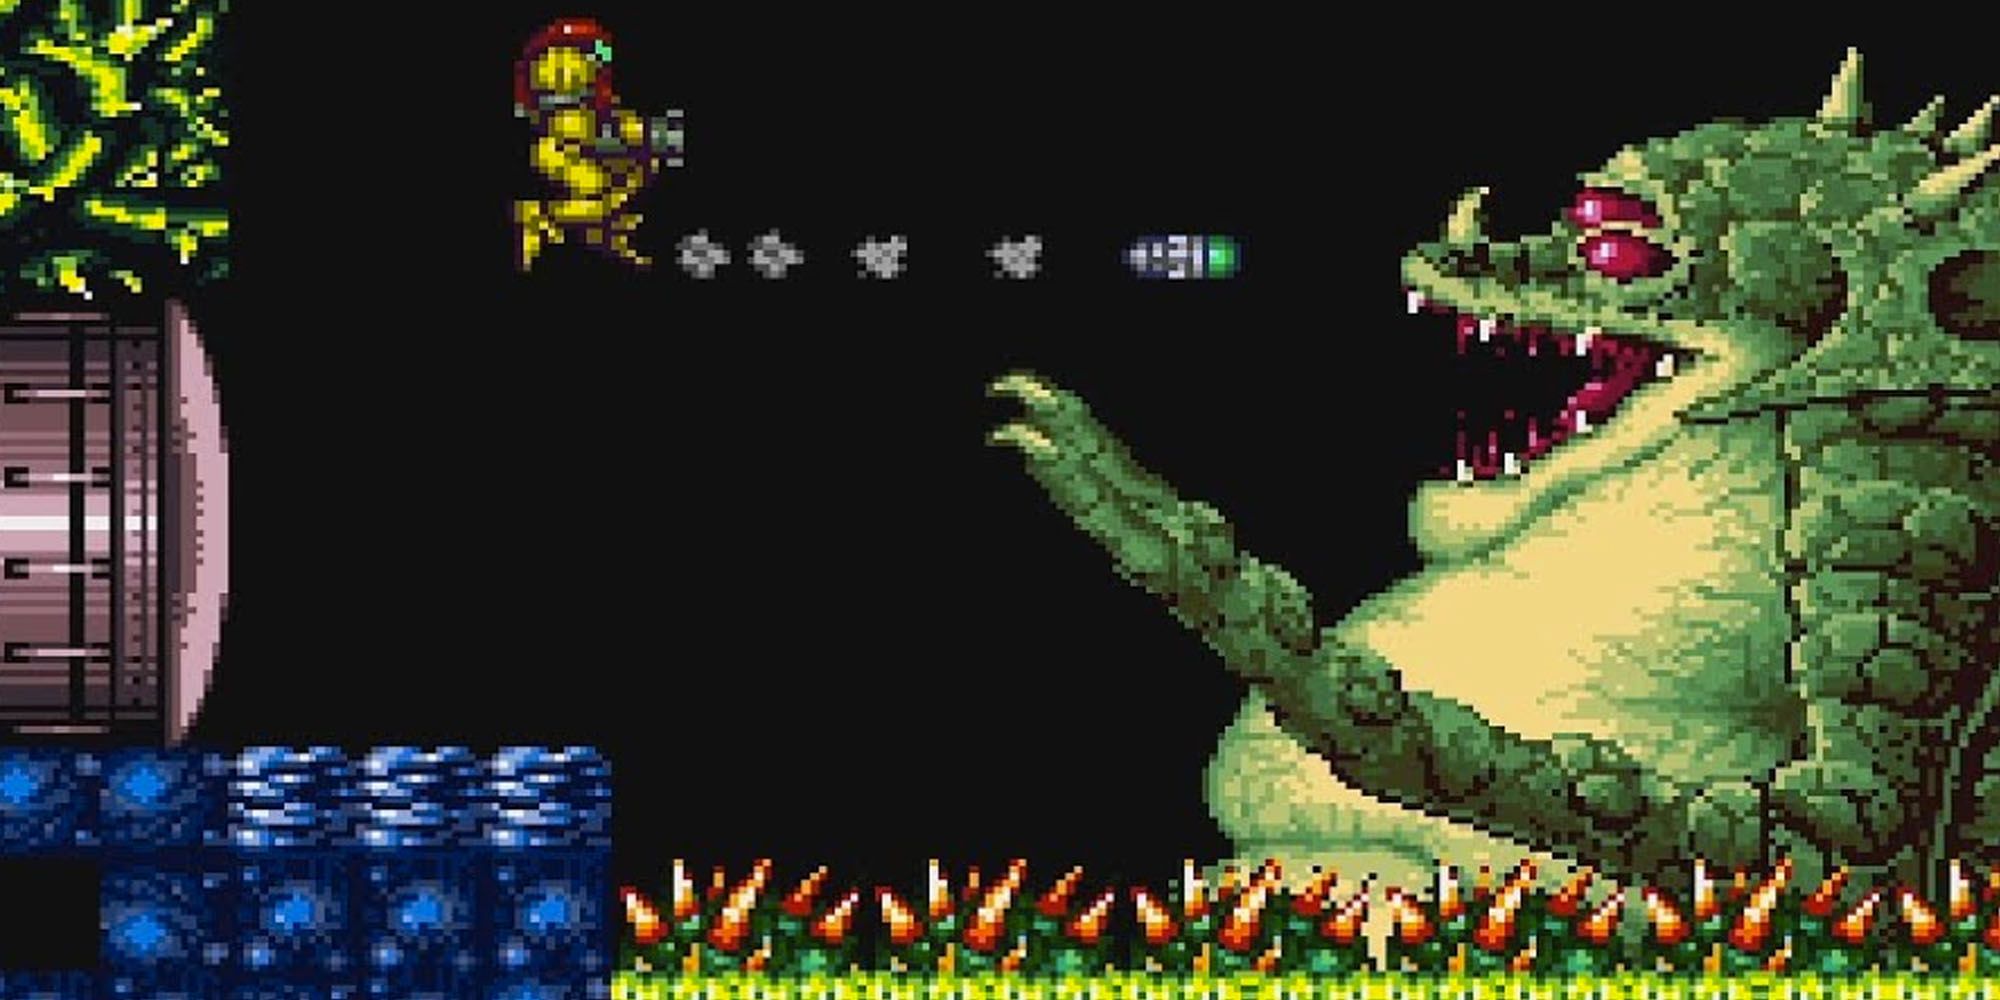 Kraid's first reappearance was in Super Metroid